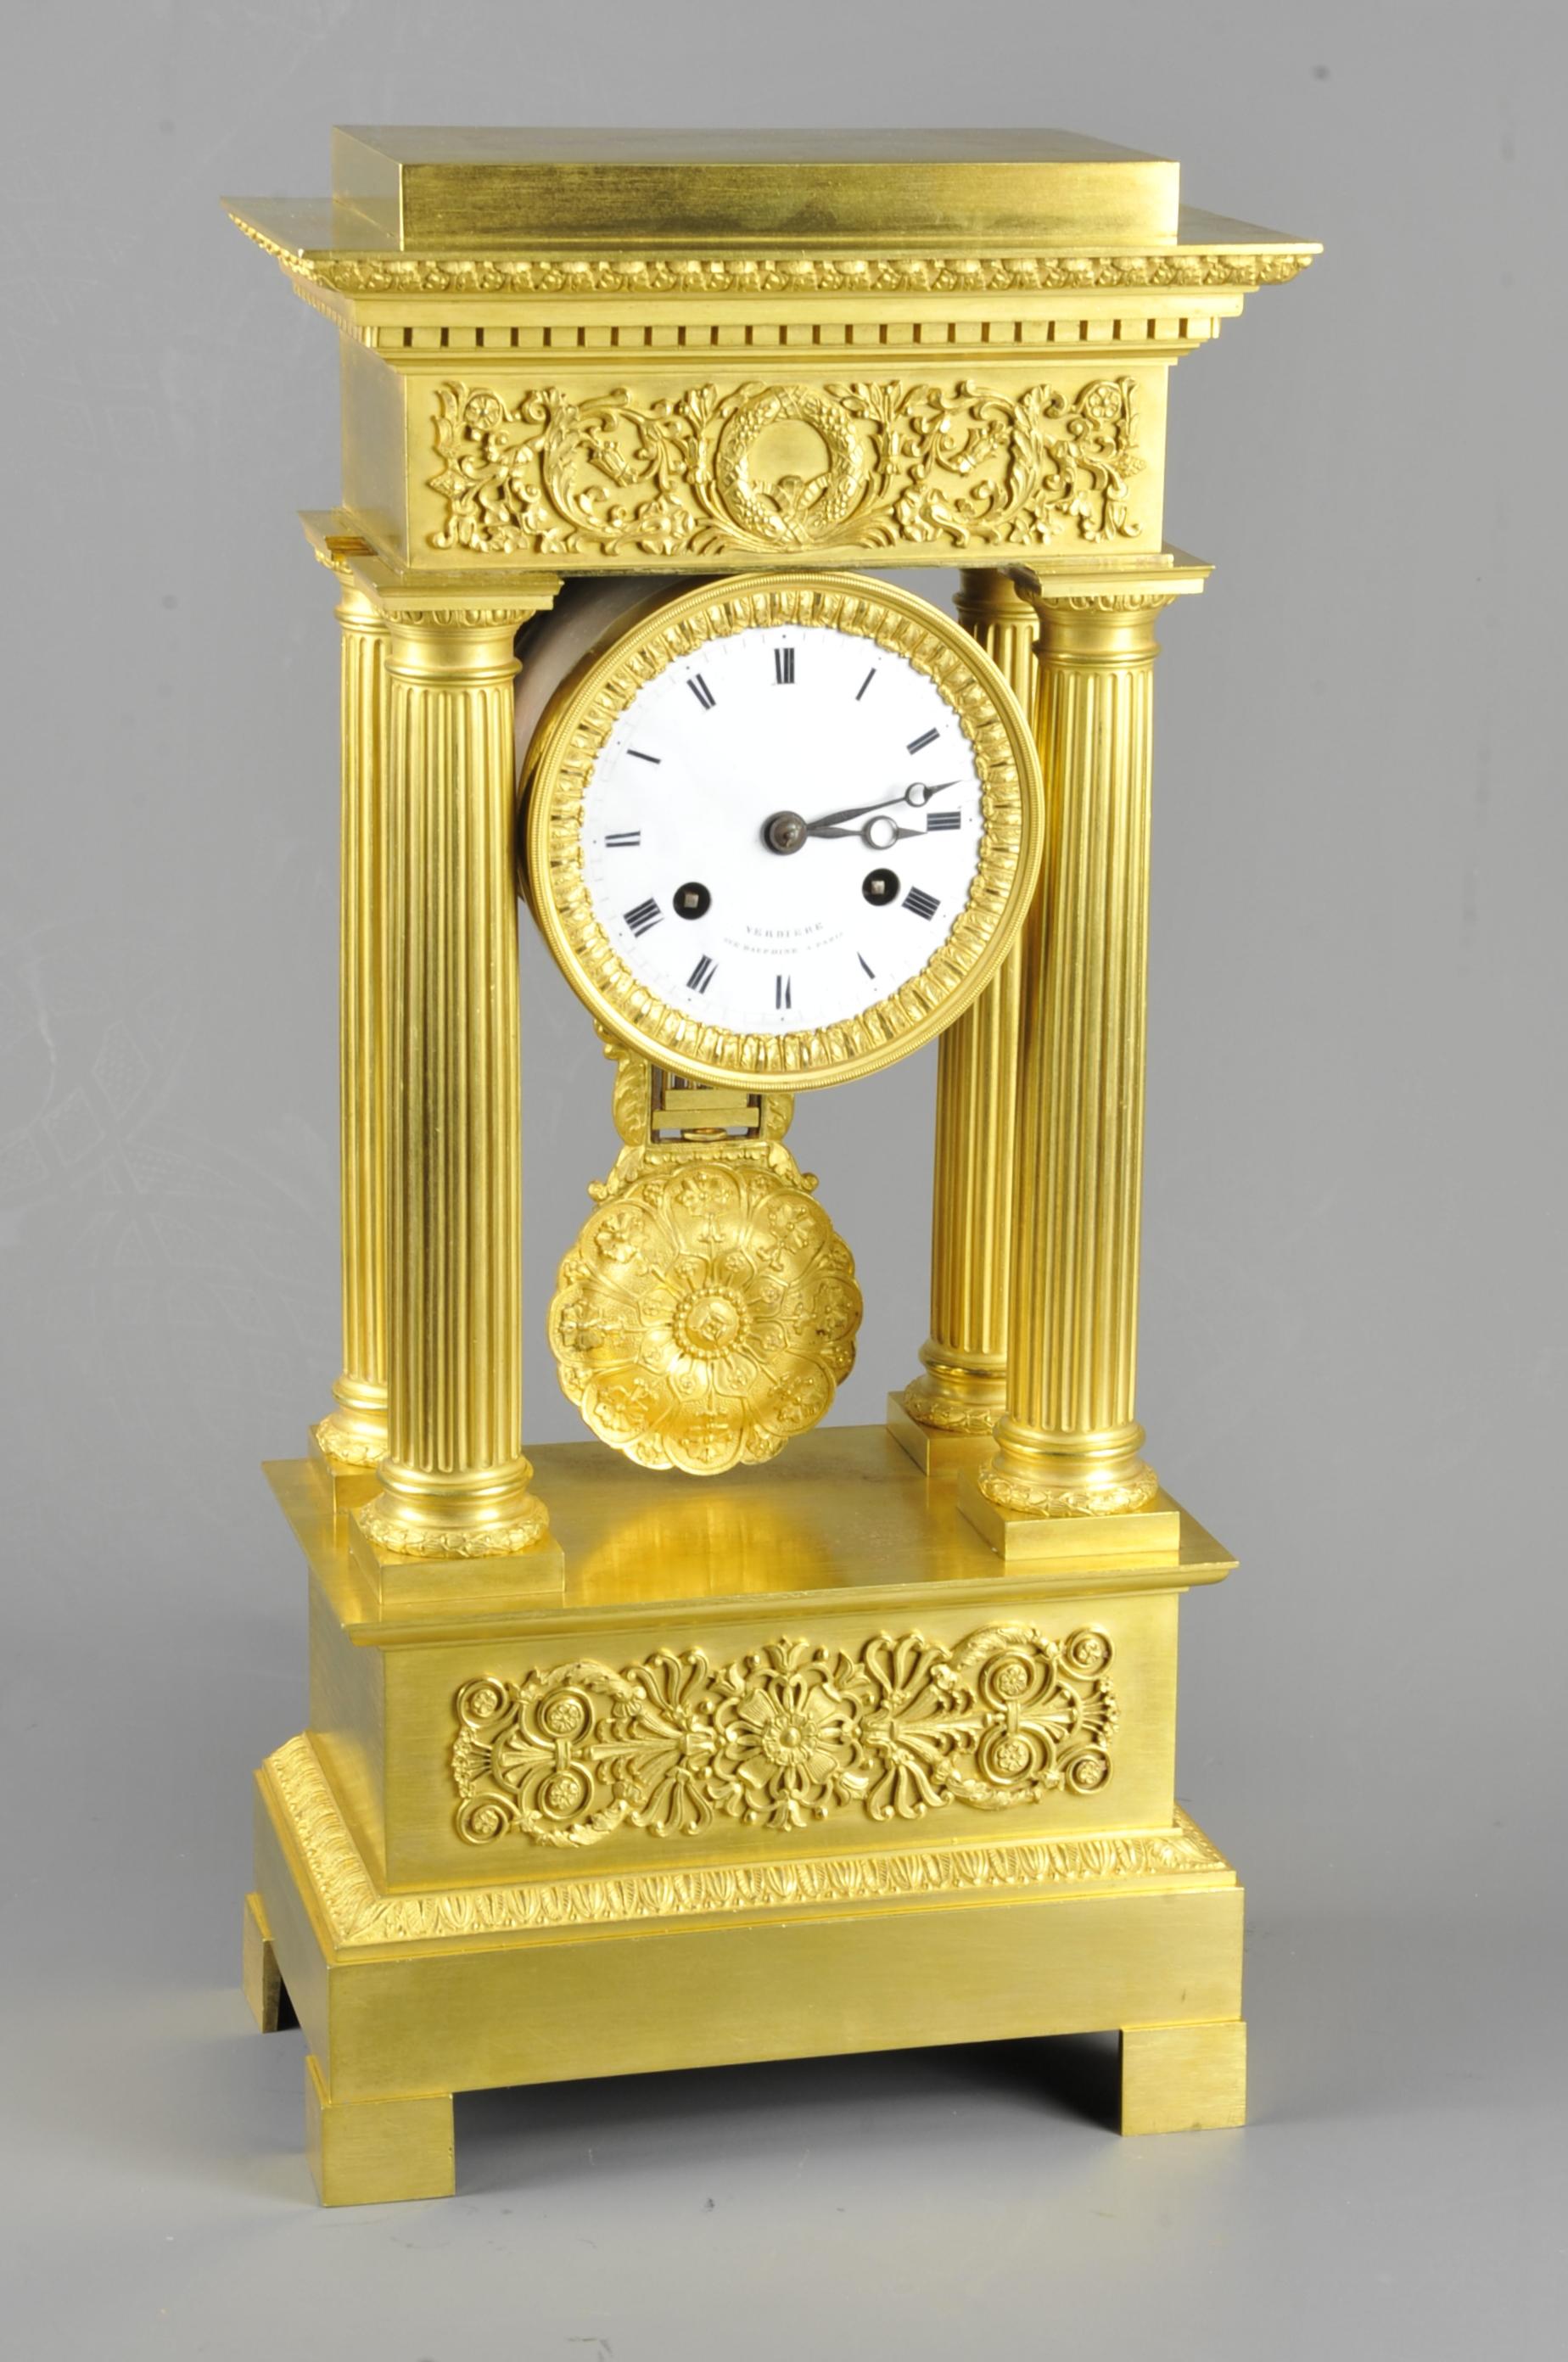 Beautiful portico clock with four Doric columns and applied ornamentation decorated with foliage, crown and masks in the style of the Empire.

In the upper part a beautiful pediment with friezes of gadroons and dentils.

CIRCA